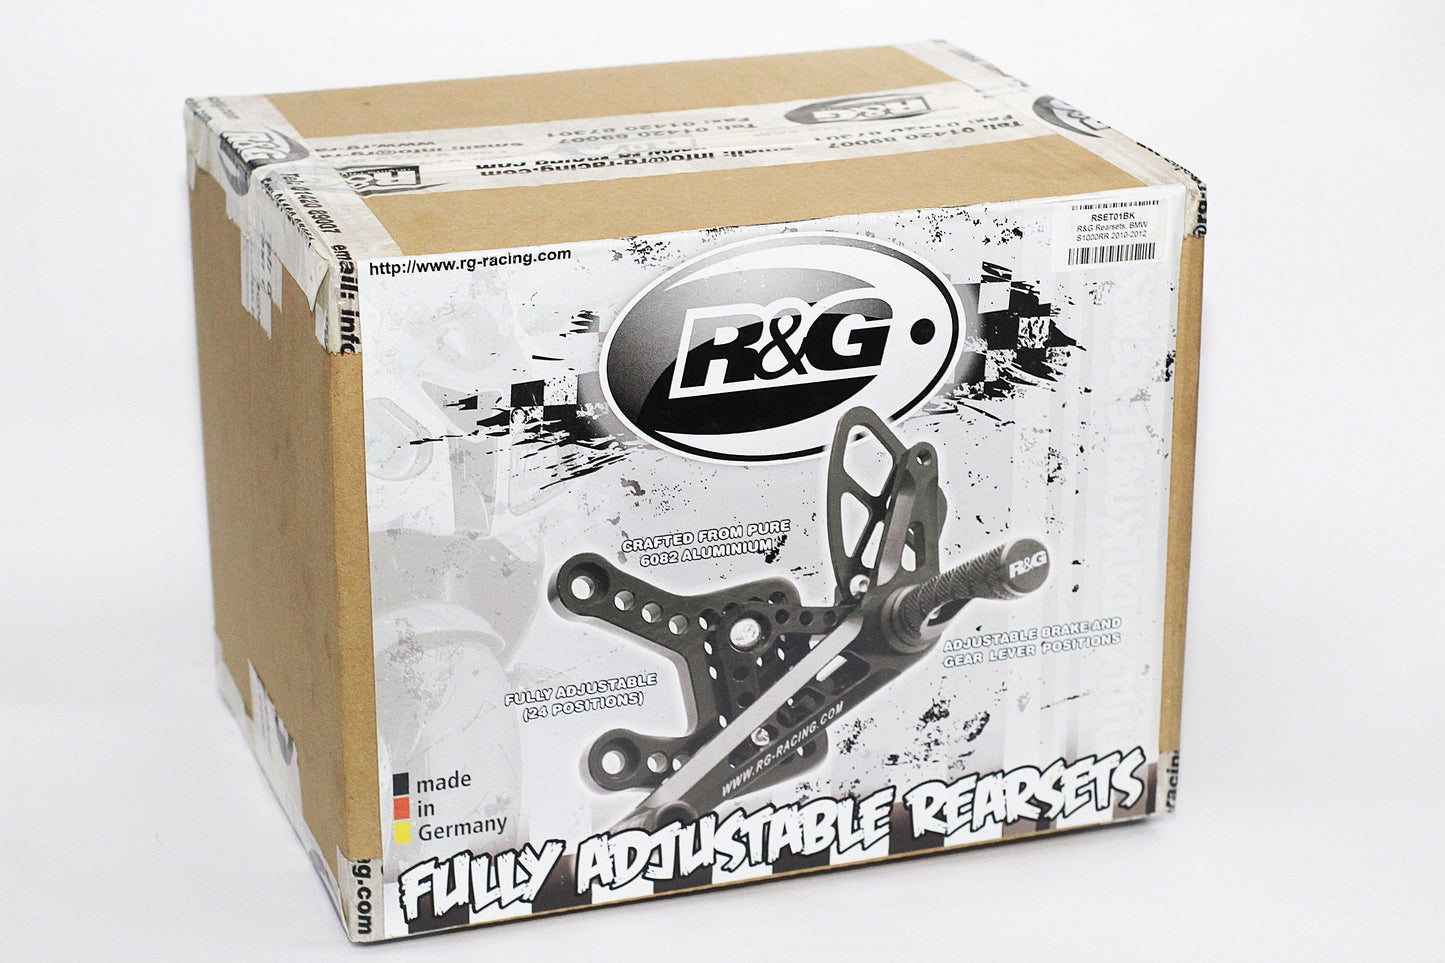 R&G Adjustable Road Rearsets fits for BMW S1000RR, HP4 & S1000R - Durian Bikers